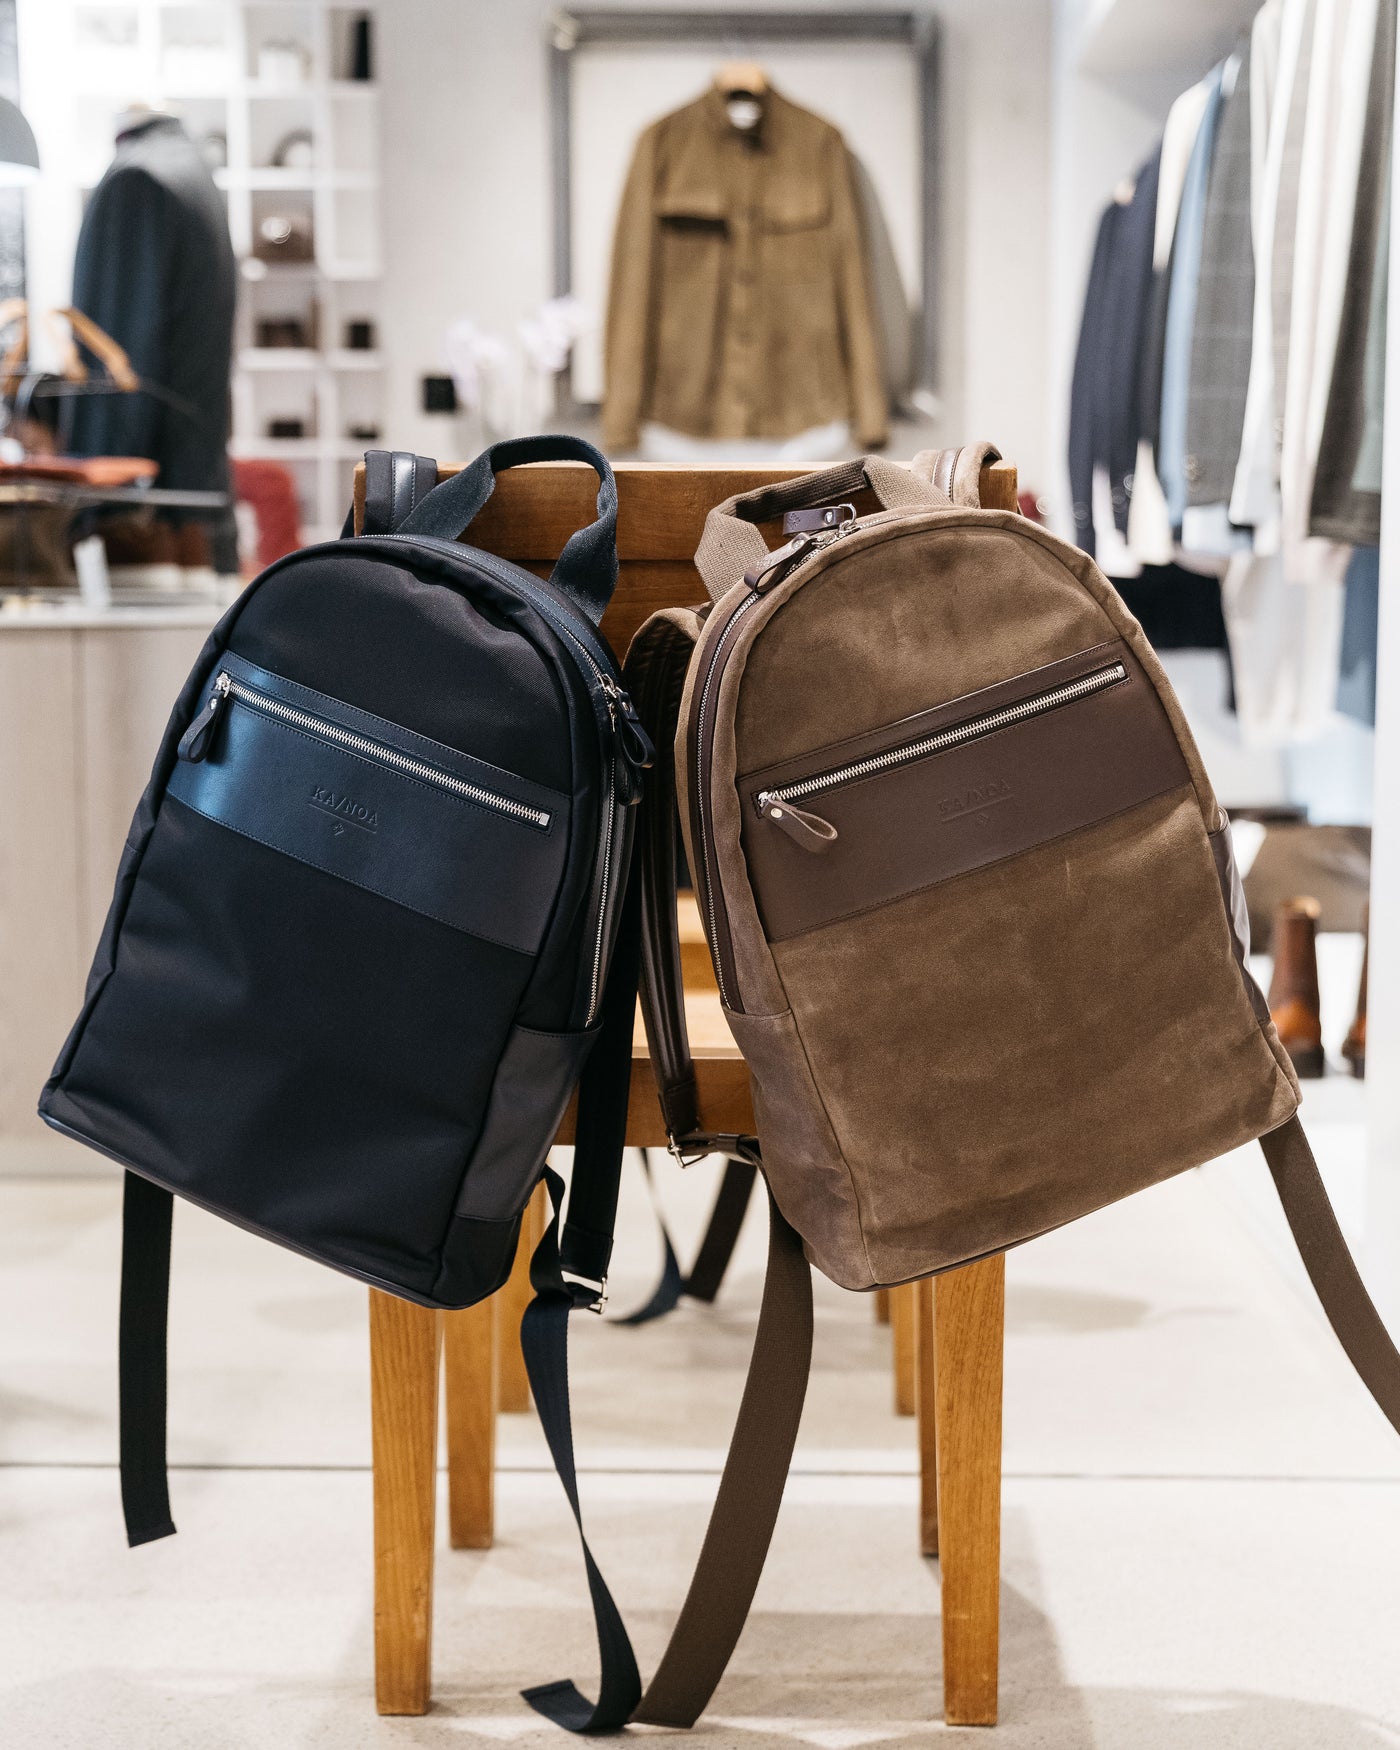 K-NOAH back pack in suede leather